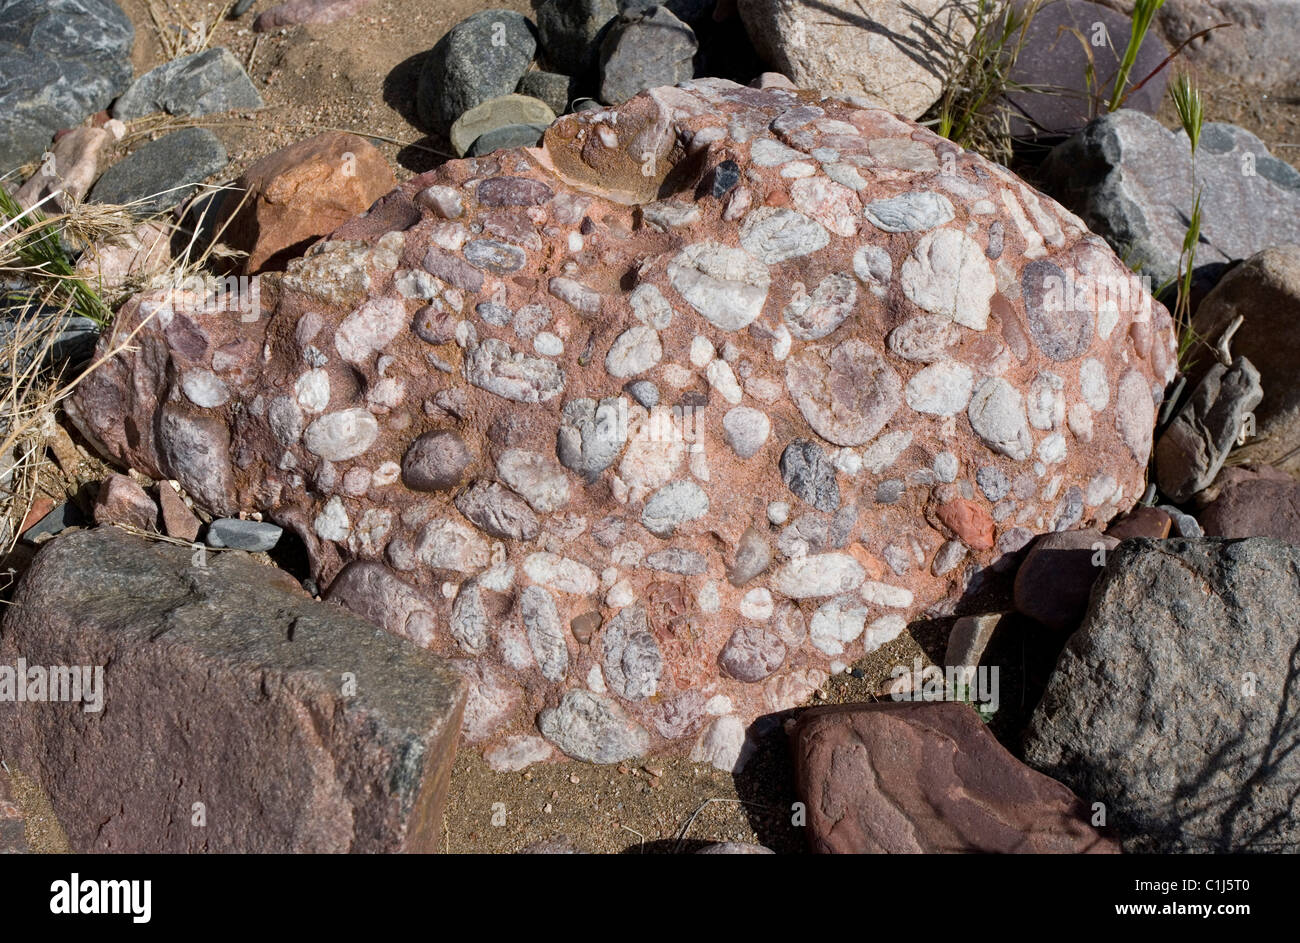 conglomerate rock showing the many smaller rocks the compose it Stock Photo